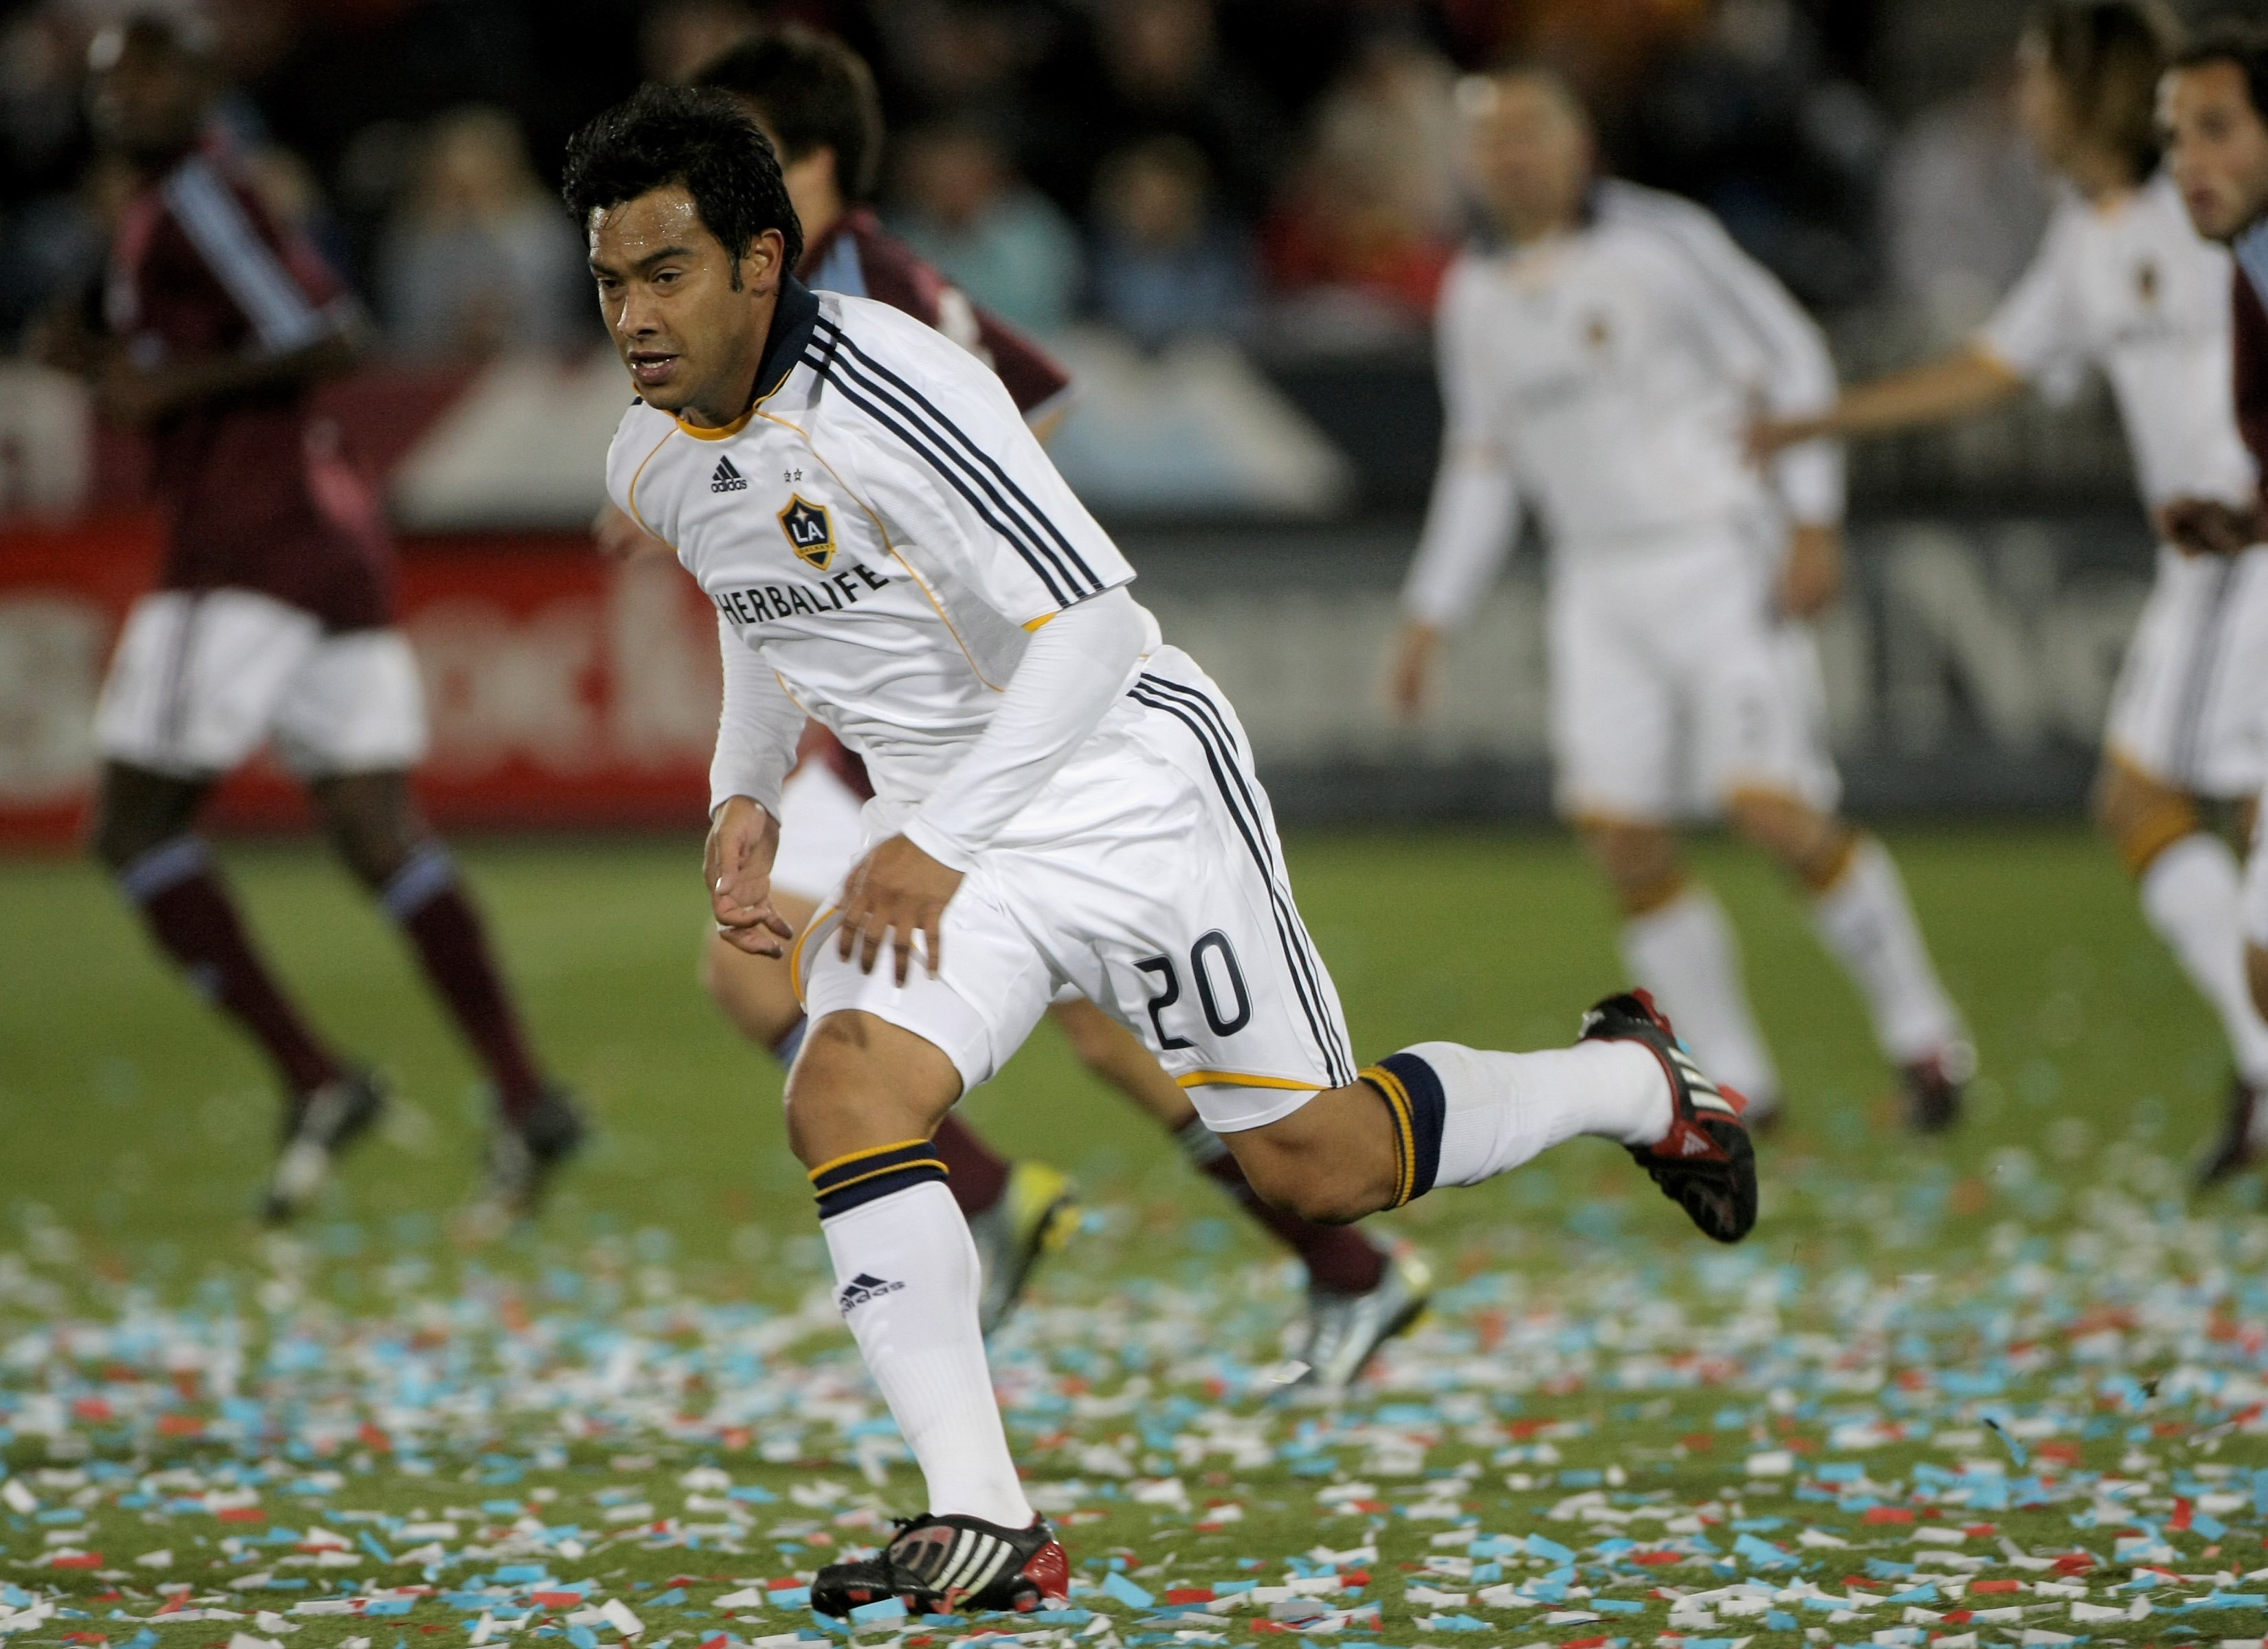 COMMERCE CITY, CO - MARCH 29:  Carlos Ruiz #20 of the Los Angeles Galaxy in action against the Colorado Rapids at Dick's Sporting Goods Park on March 29, 2008 in Commerce City, Colorado. The Rapids defeated the Galaxy 4-0.  (Photo by Doug Pensinger/Getty 